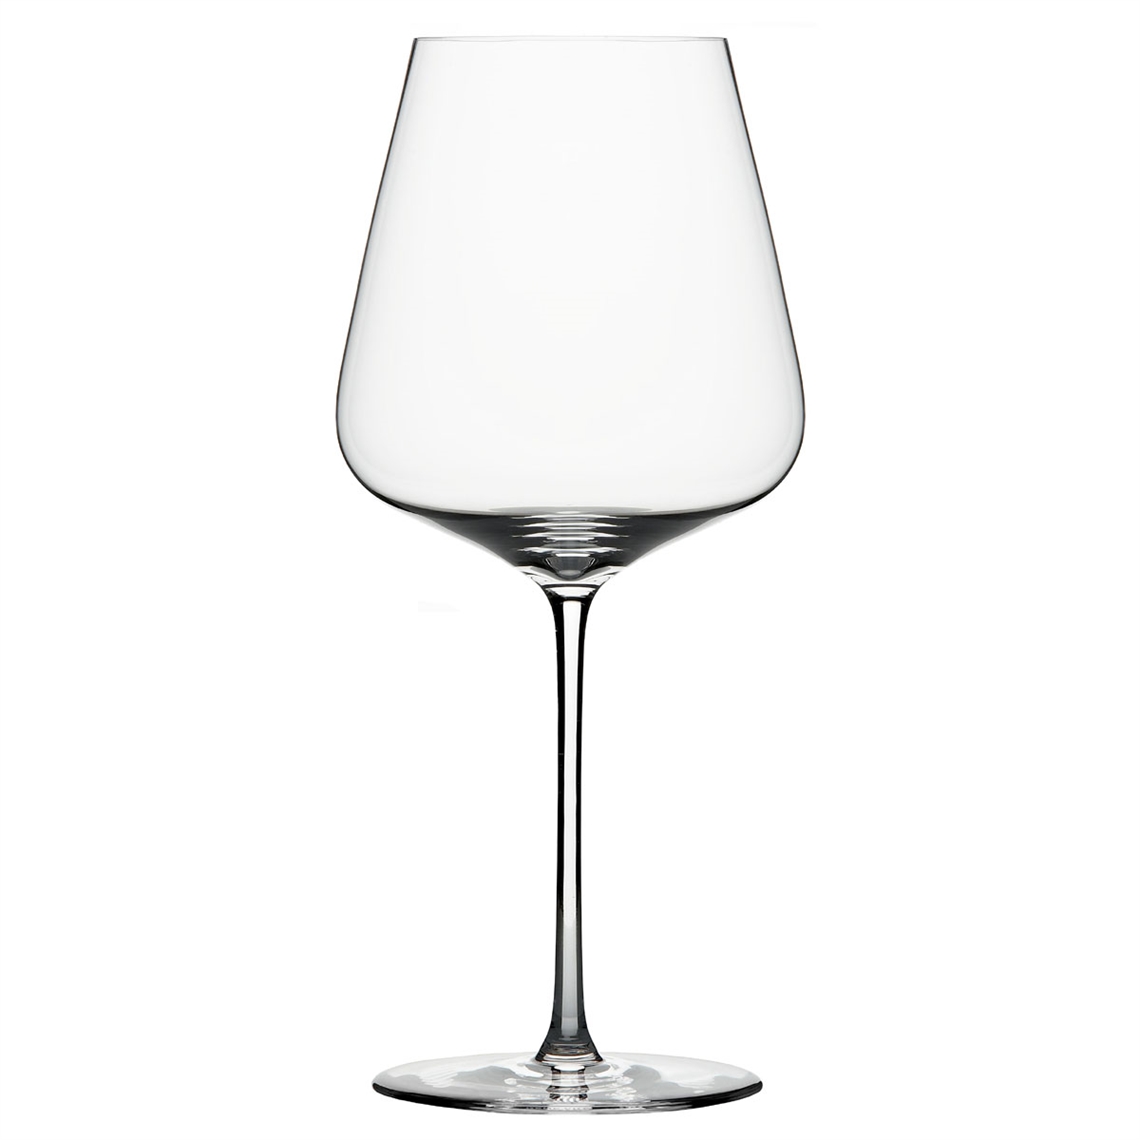 View more water glasses / tumblers from our Premium Mouth Blown Glassware range